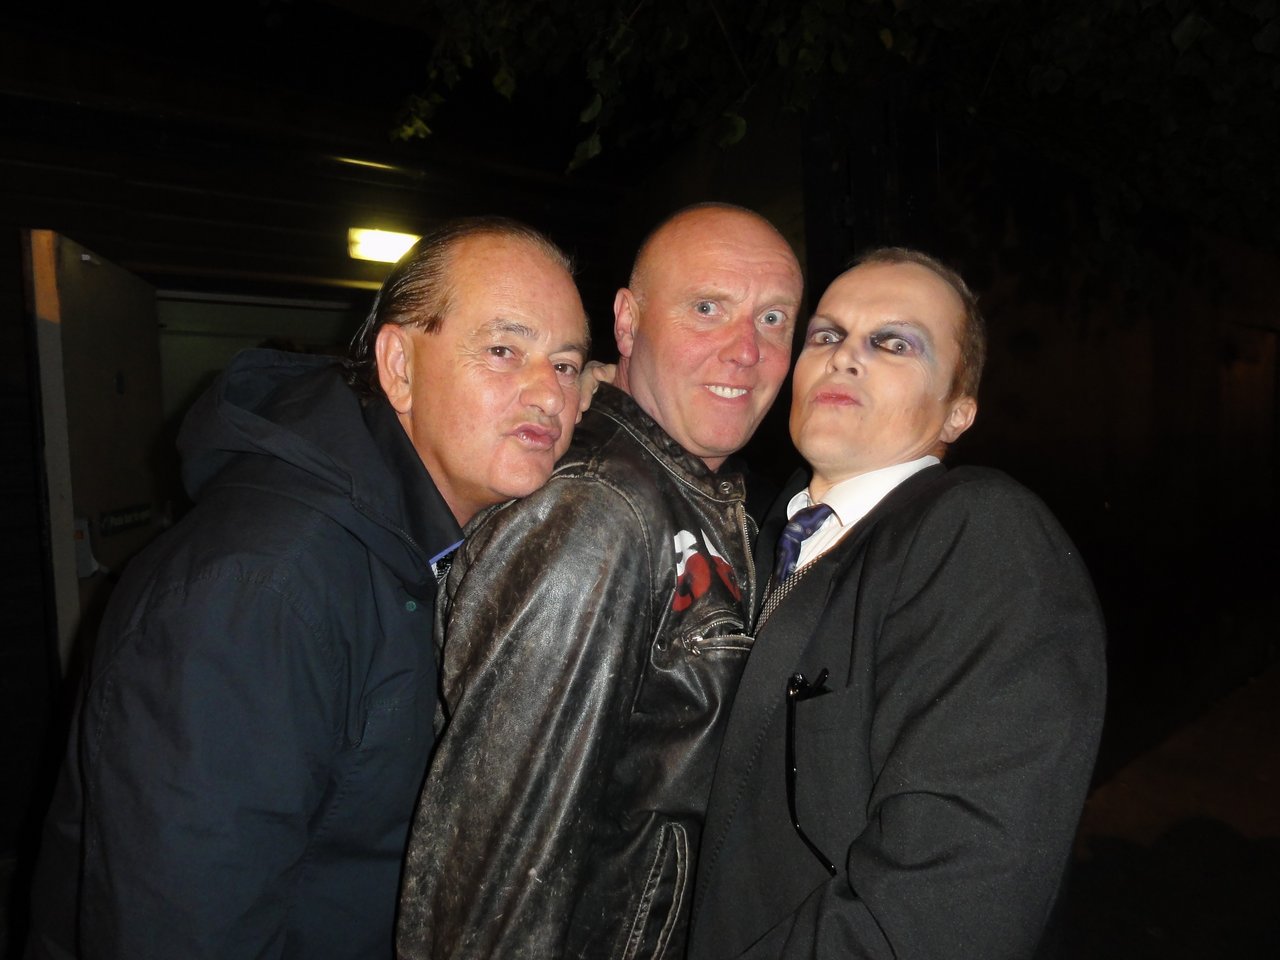 29 Heaven 17 and Mr Normall.JPG